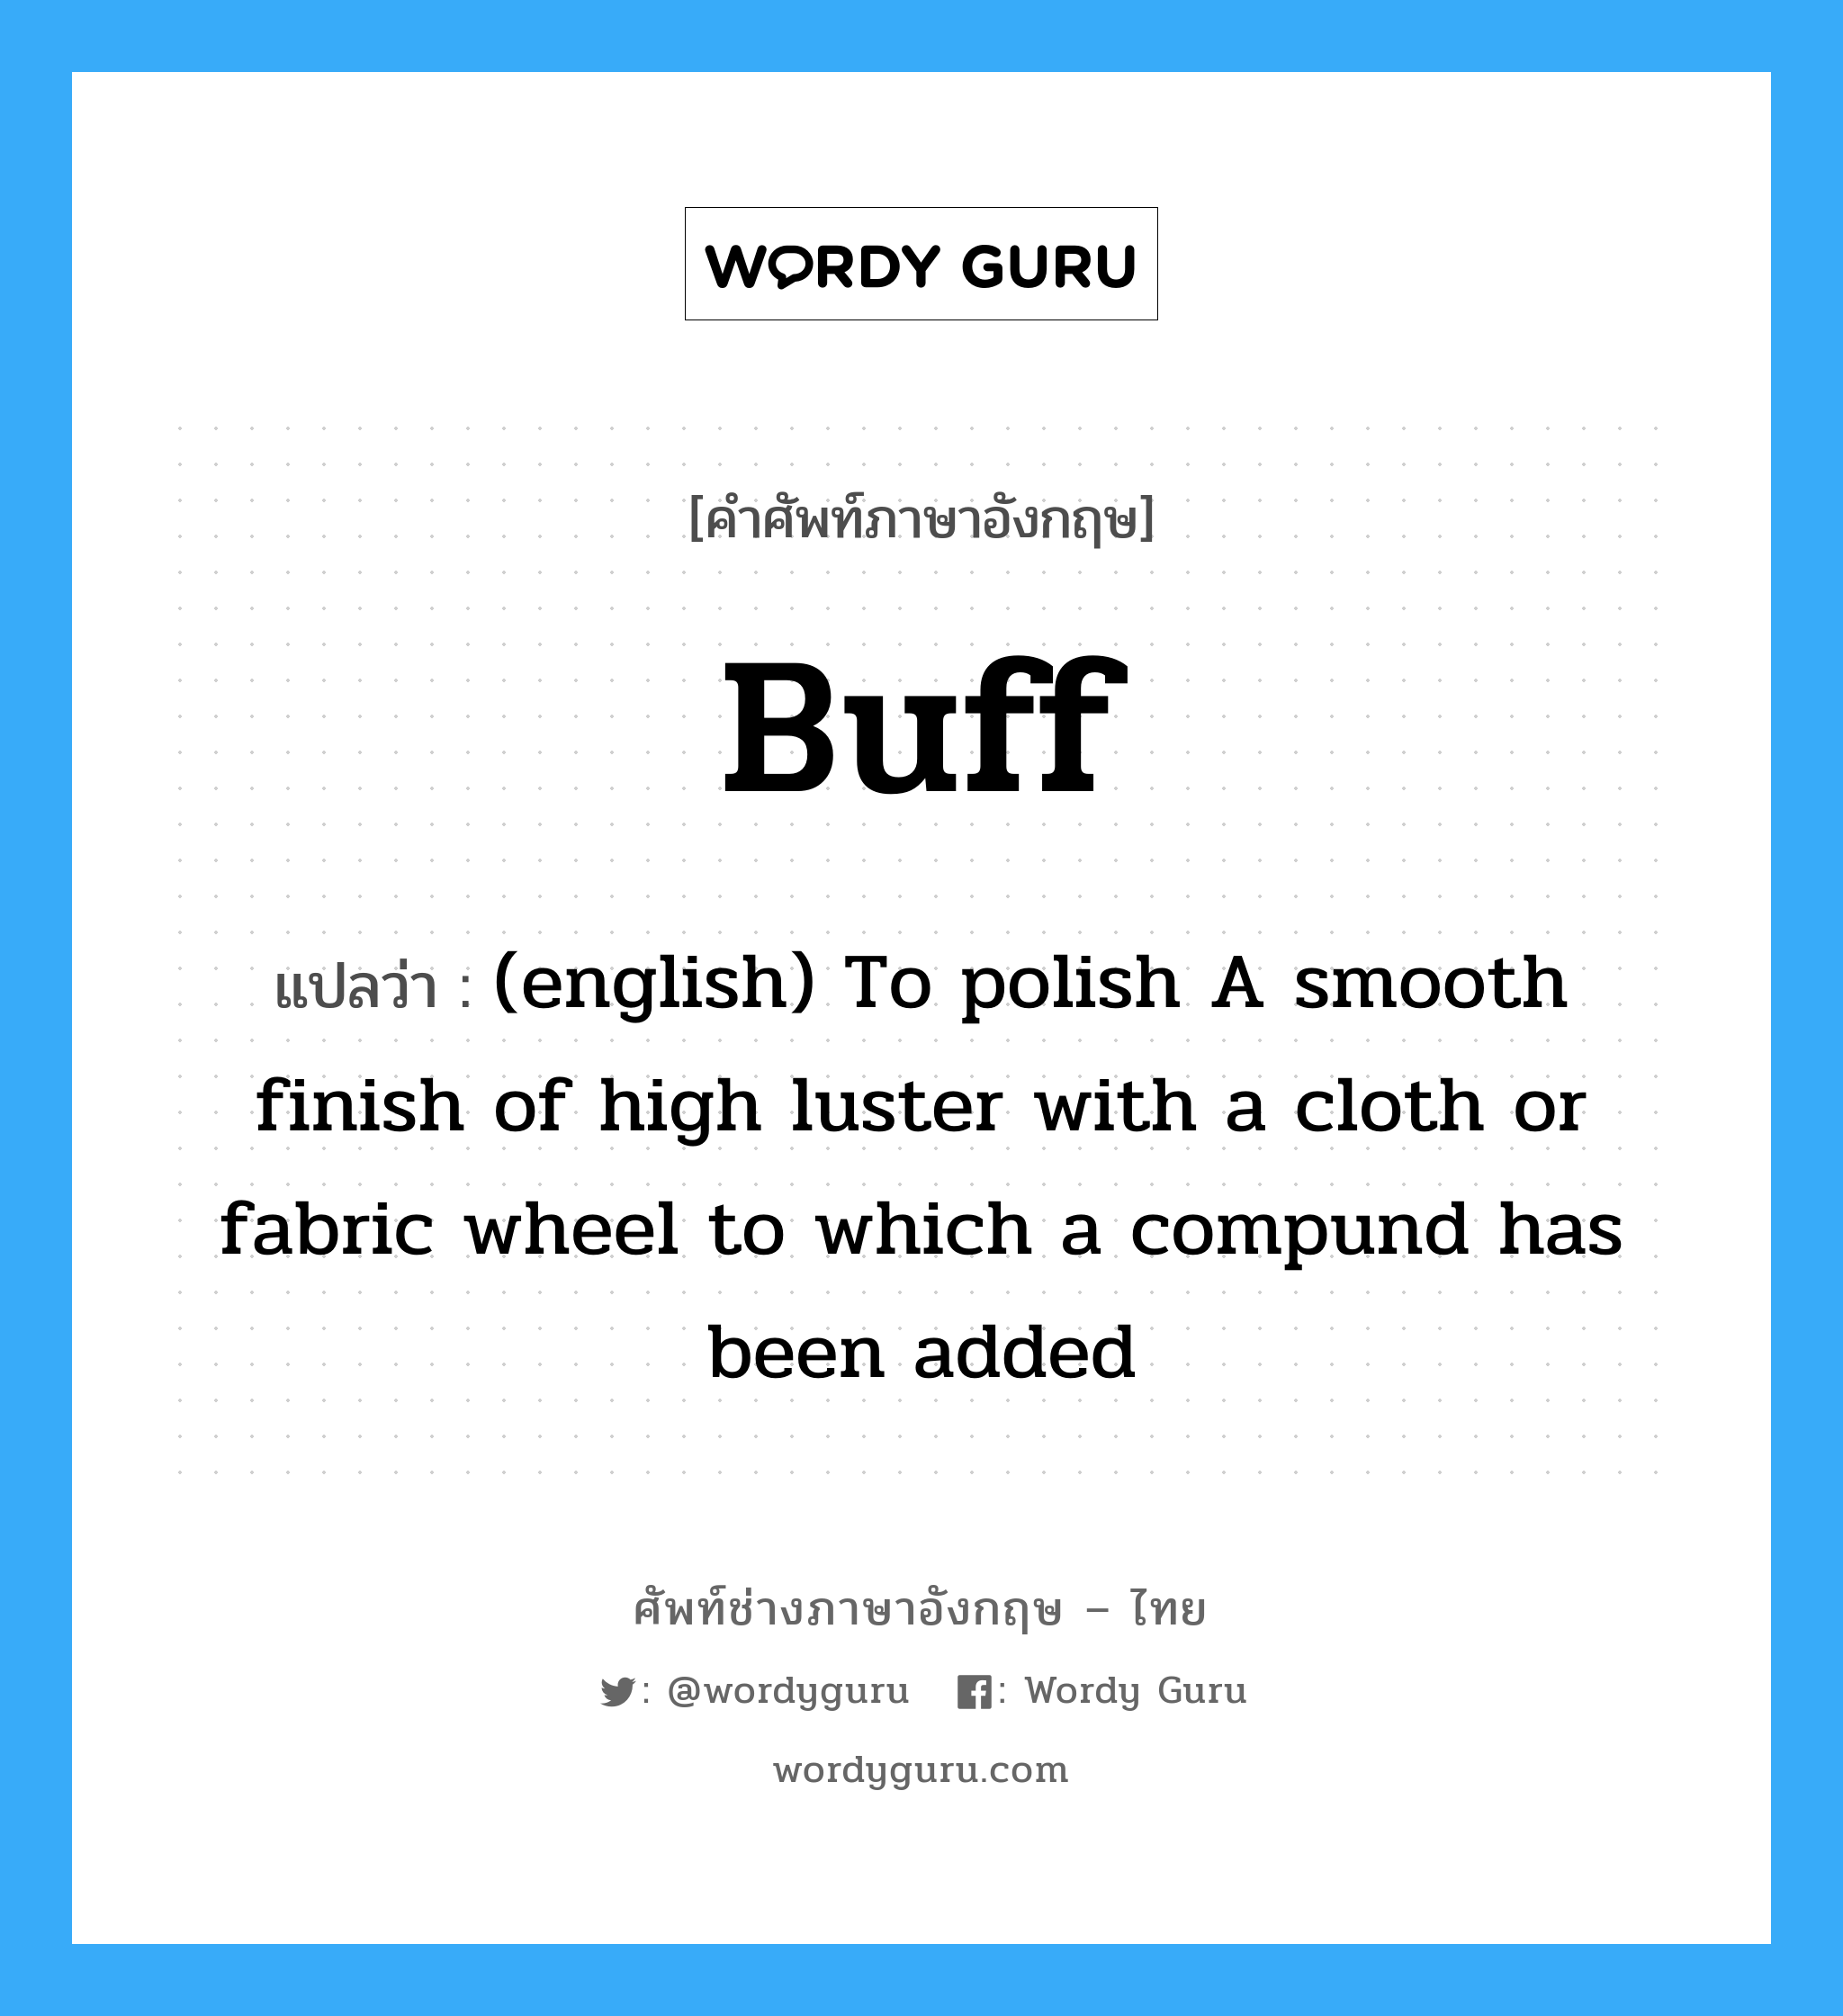 Buff แปลว่า?, คำศัพท์ช่างภาษาอังกฤษ - ไทย Buff คำศัพท์ภาษาอังกฤษ Buff แปลว่า (english) To polish A smooth finish of high luster with a cloth or fabric wheel to which a compund has been added